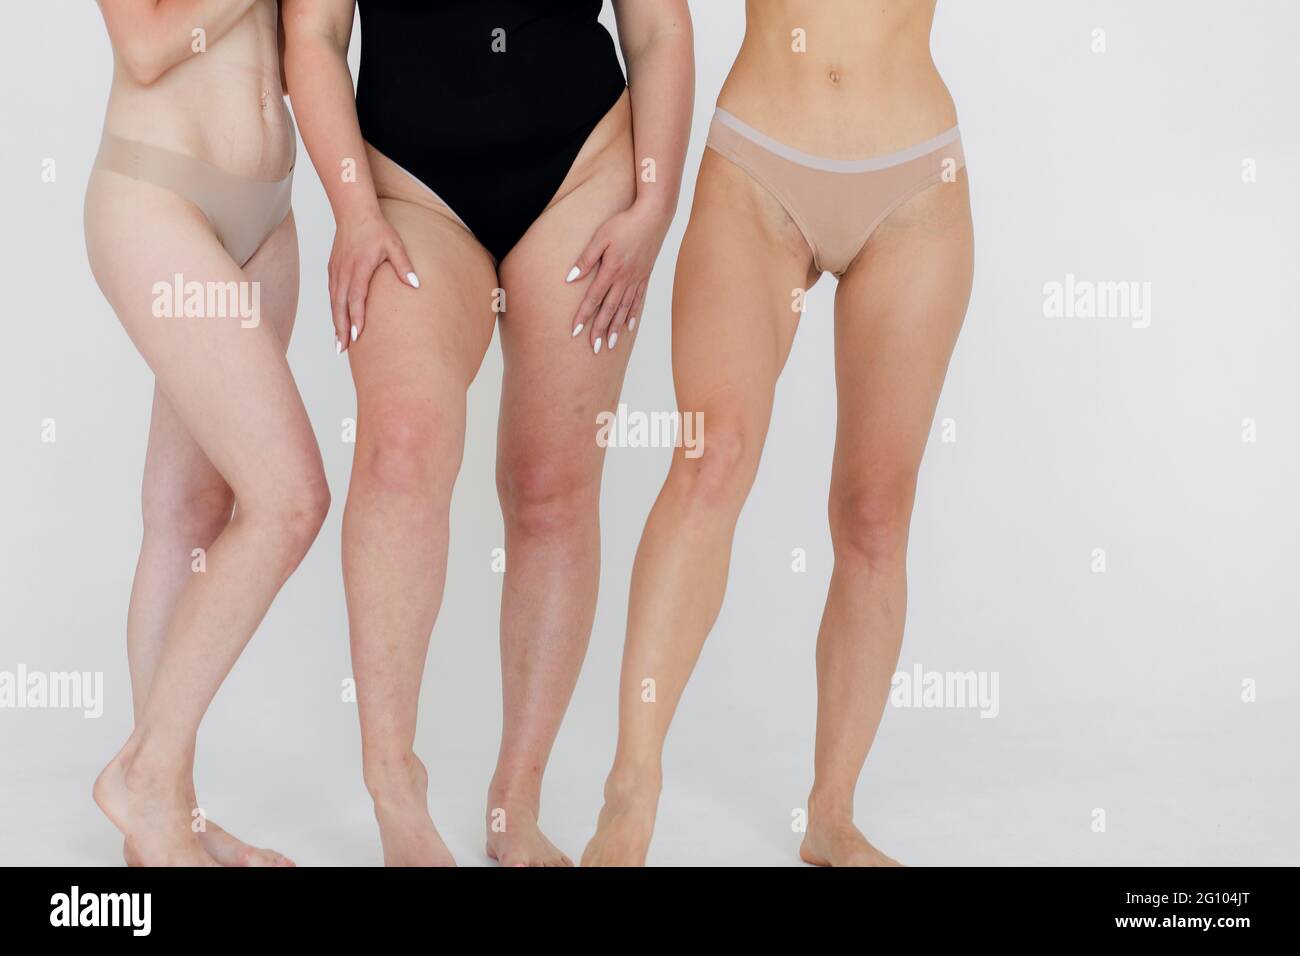 Group of women with different body and ethnicity posing together to show the woman power and strength. Curvy and skinny kind of female body concept Stock Photo